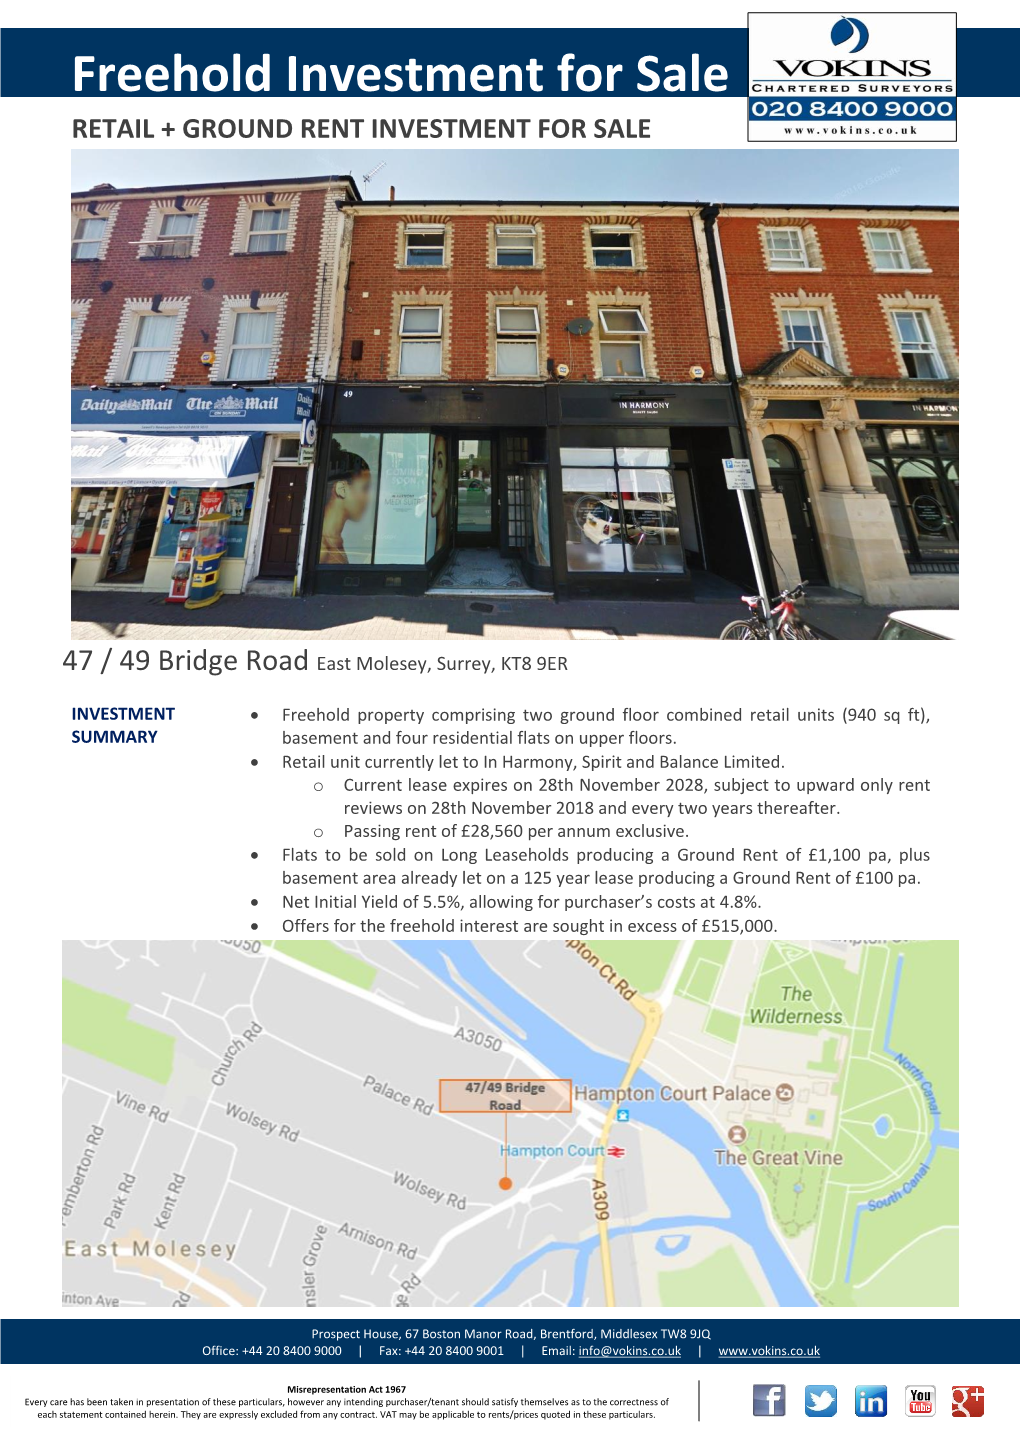 Freehold Investment for Sale RETAIL + GROUND RENT INVESTMENT for SALE